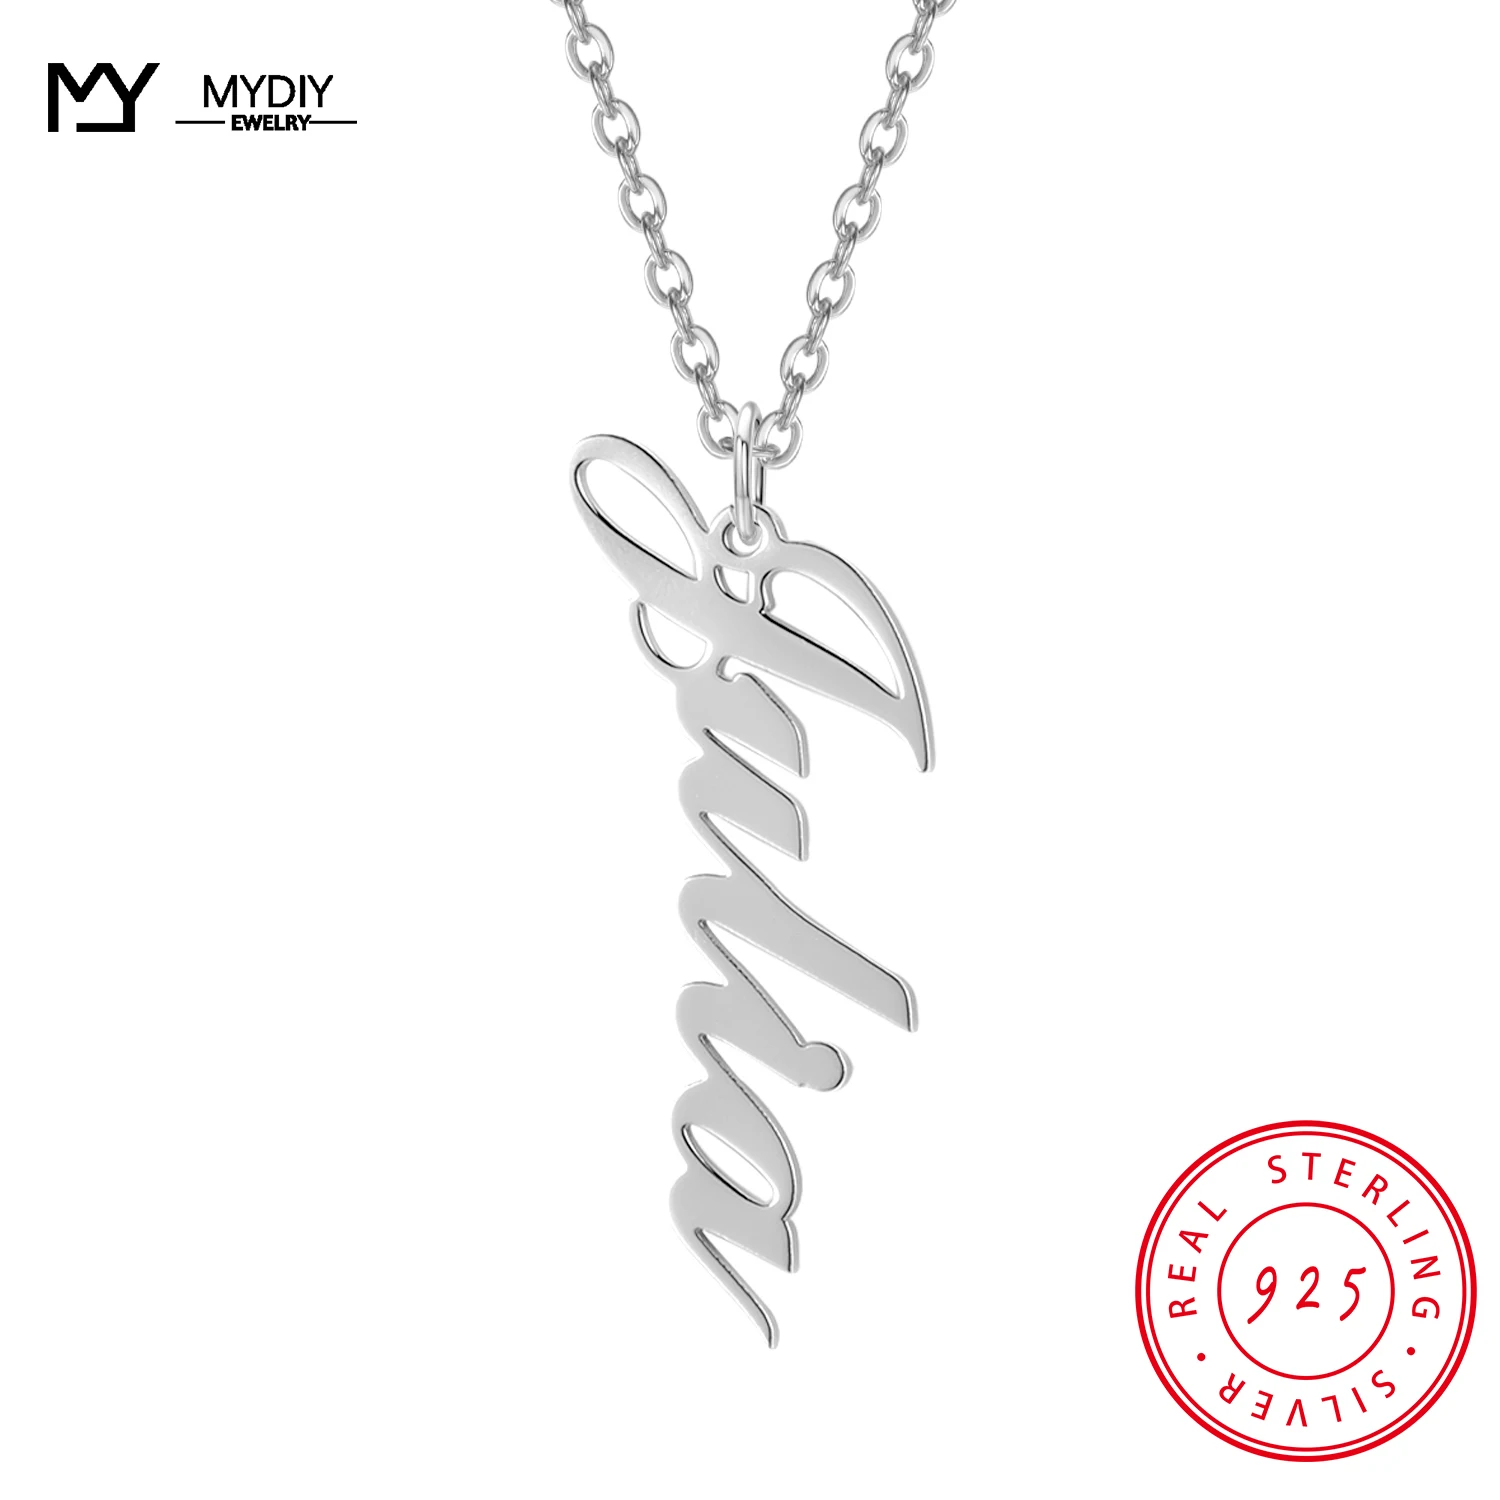 

Customized 925 Stering Silver Name Necklace Personalized Letter Choker Necklace Pendant Nameplate Gift MYDIY New Trend Jewelry